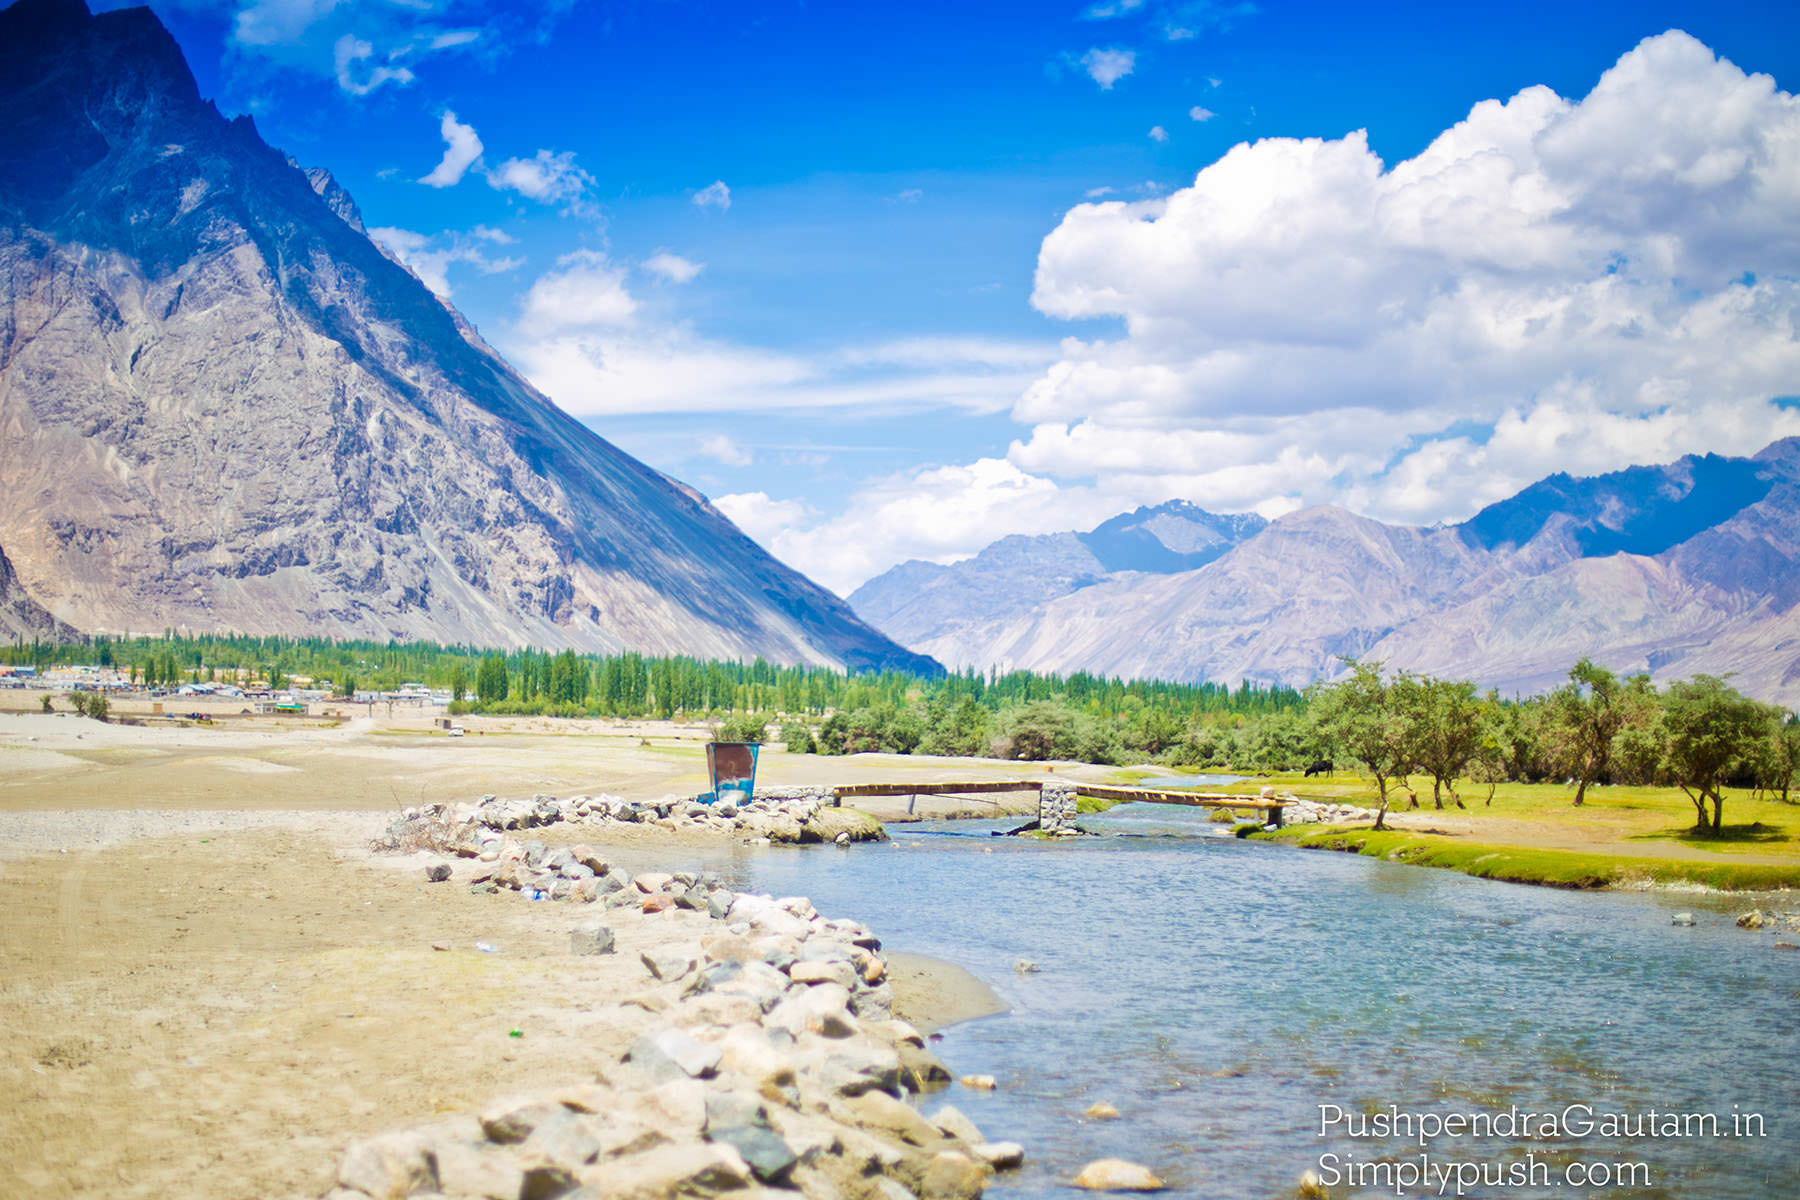 Visit Nubra Valley on a trip to India